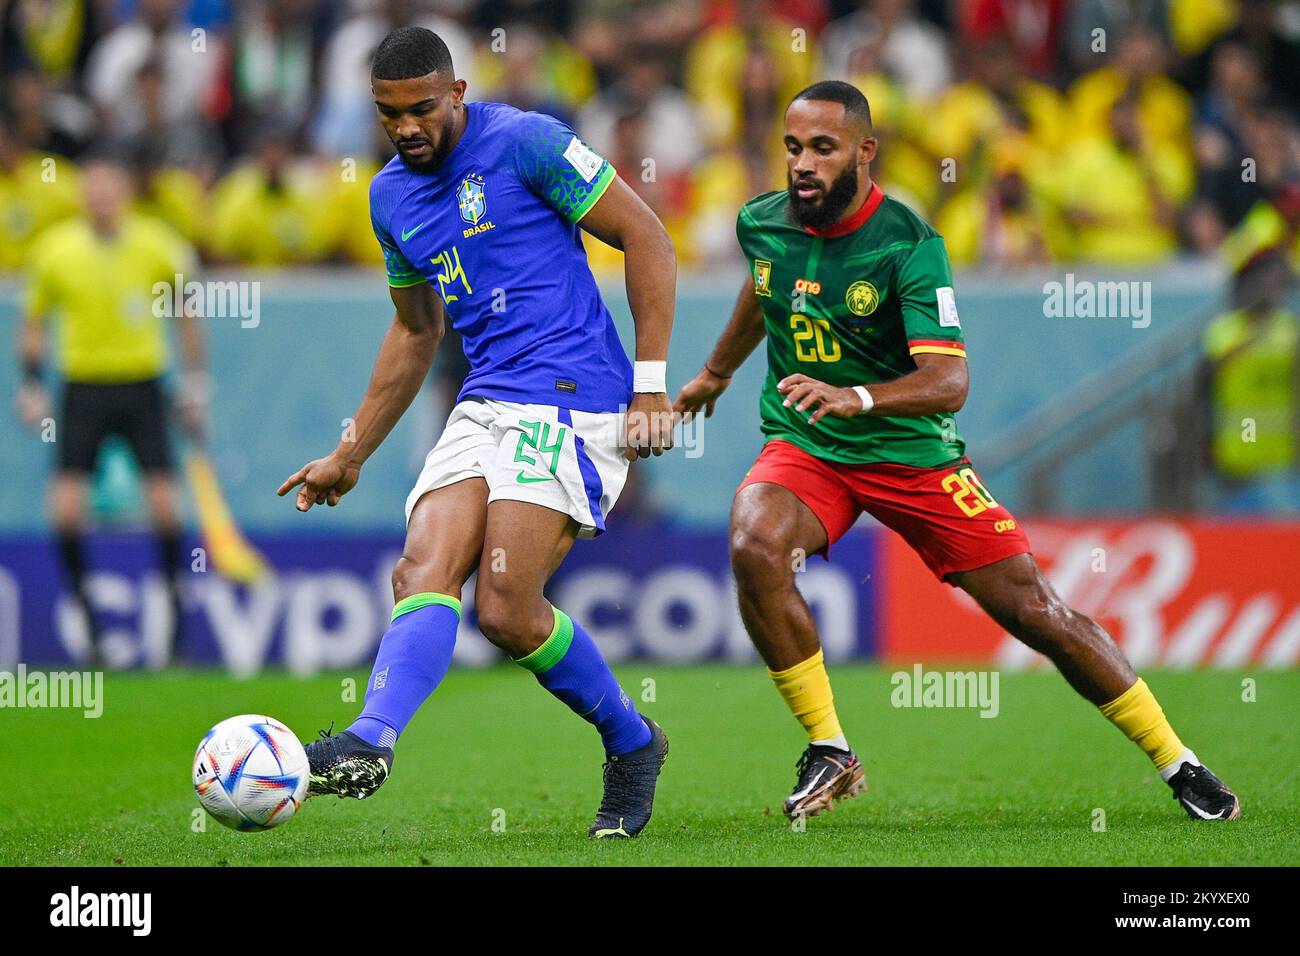 LUSAIL CITY, QATAR - DECEMBER 2: Bremer of Brazil battles for the ball with Bryan Mbeumo of Cameroon during the Group G - FIFA World Cup Qatar 2022 match between Cameroon and Brazil at the Lusail Stadium on December 2, 2022 in Lusail City, Qatar (Photo by Pablo Morano/BSR Agency) Stock Photo